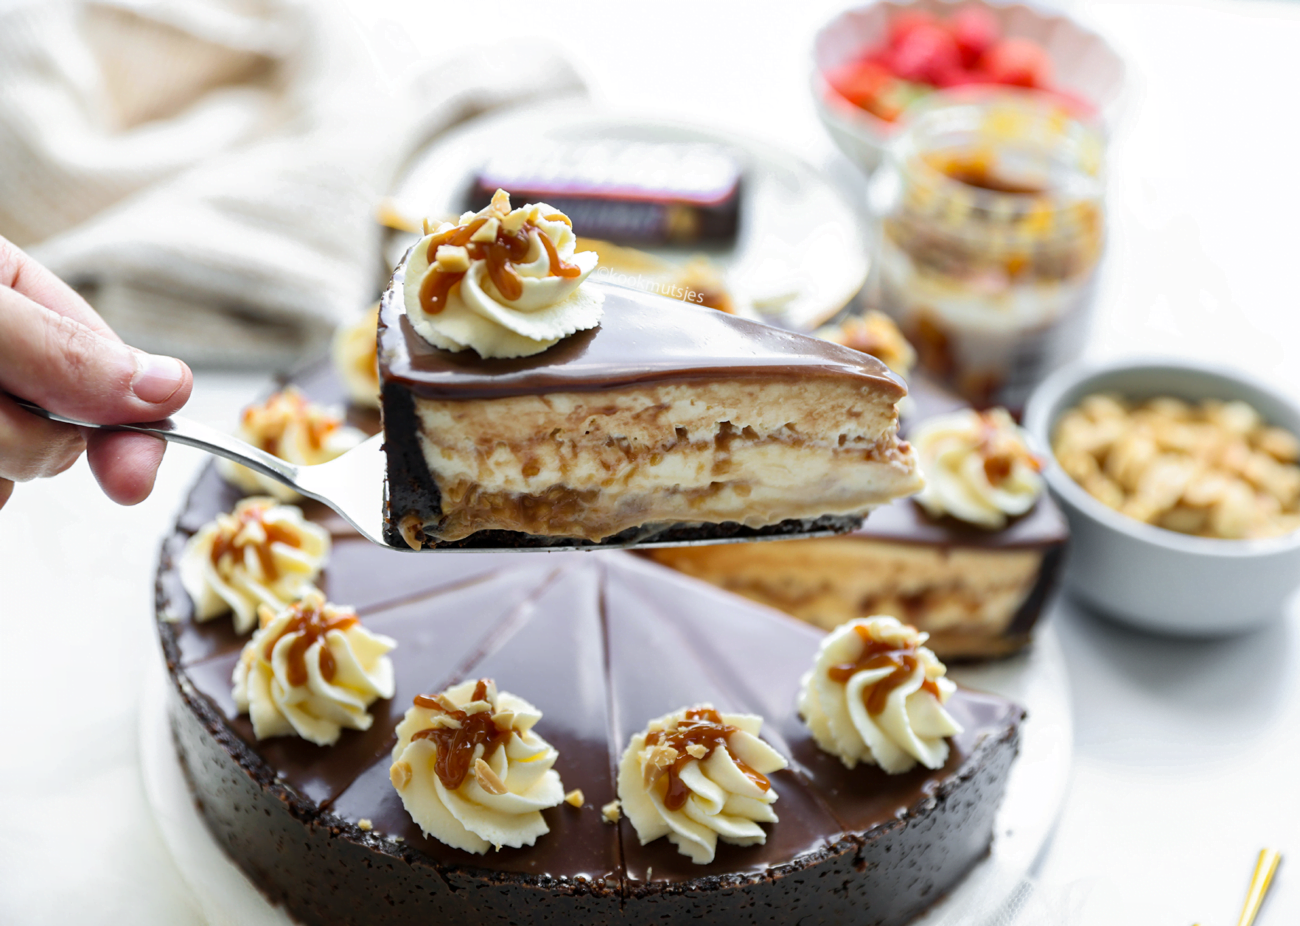 Snickers cheesecake (no bake)